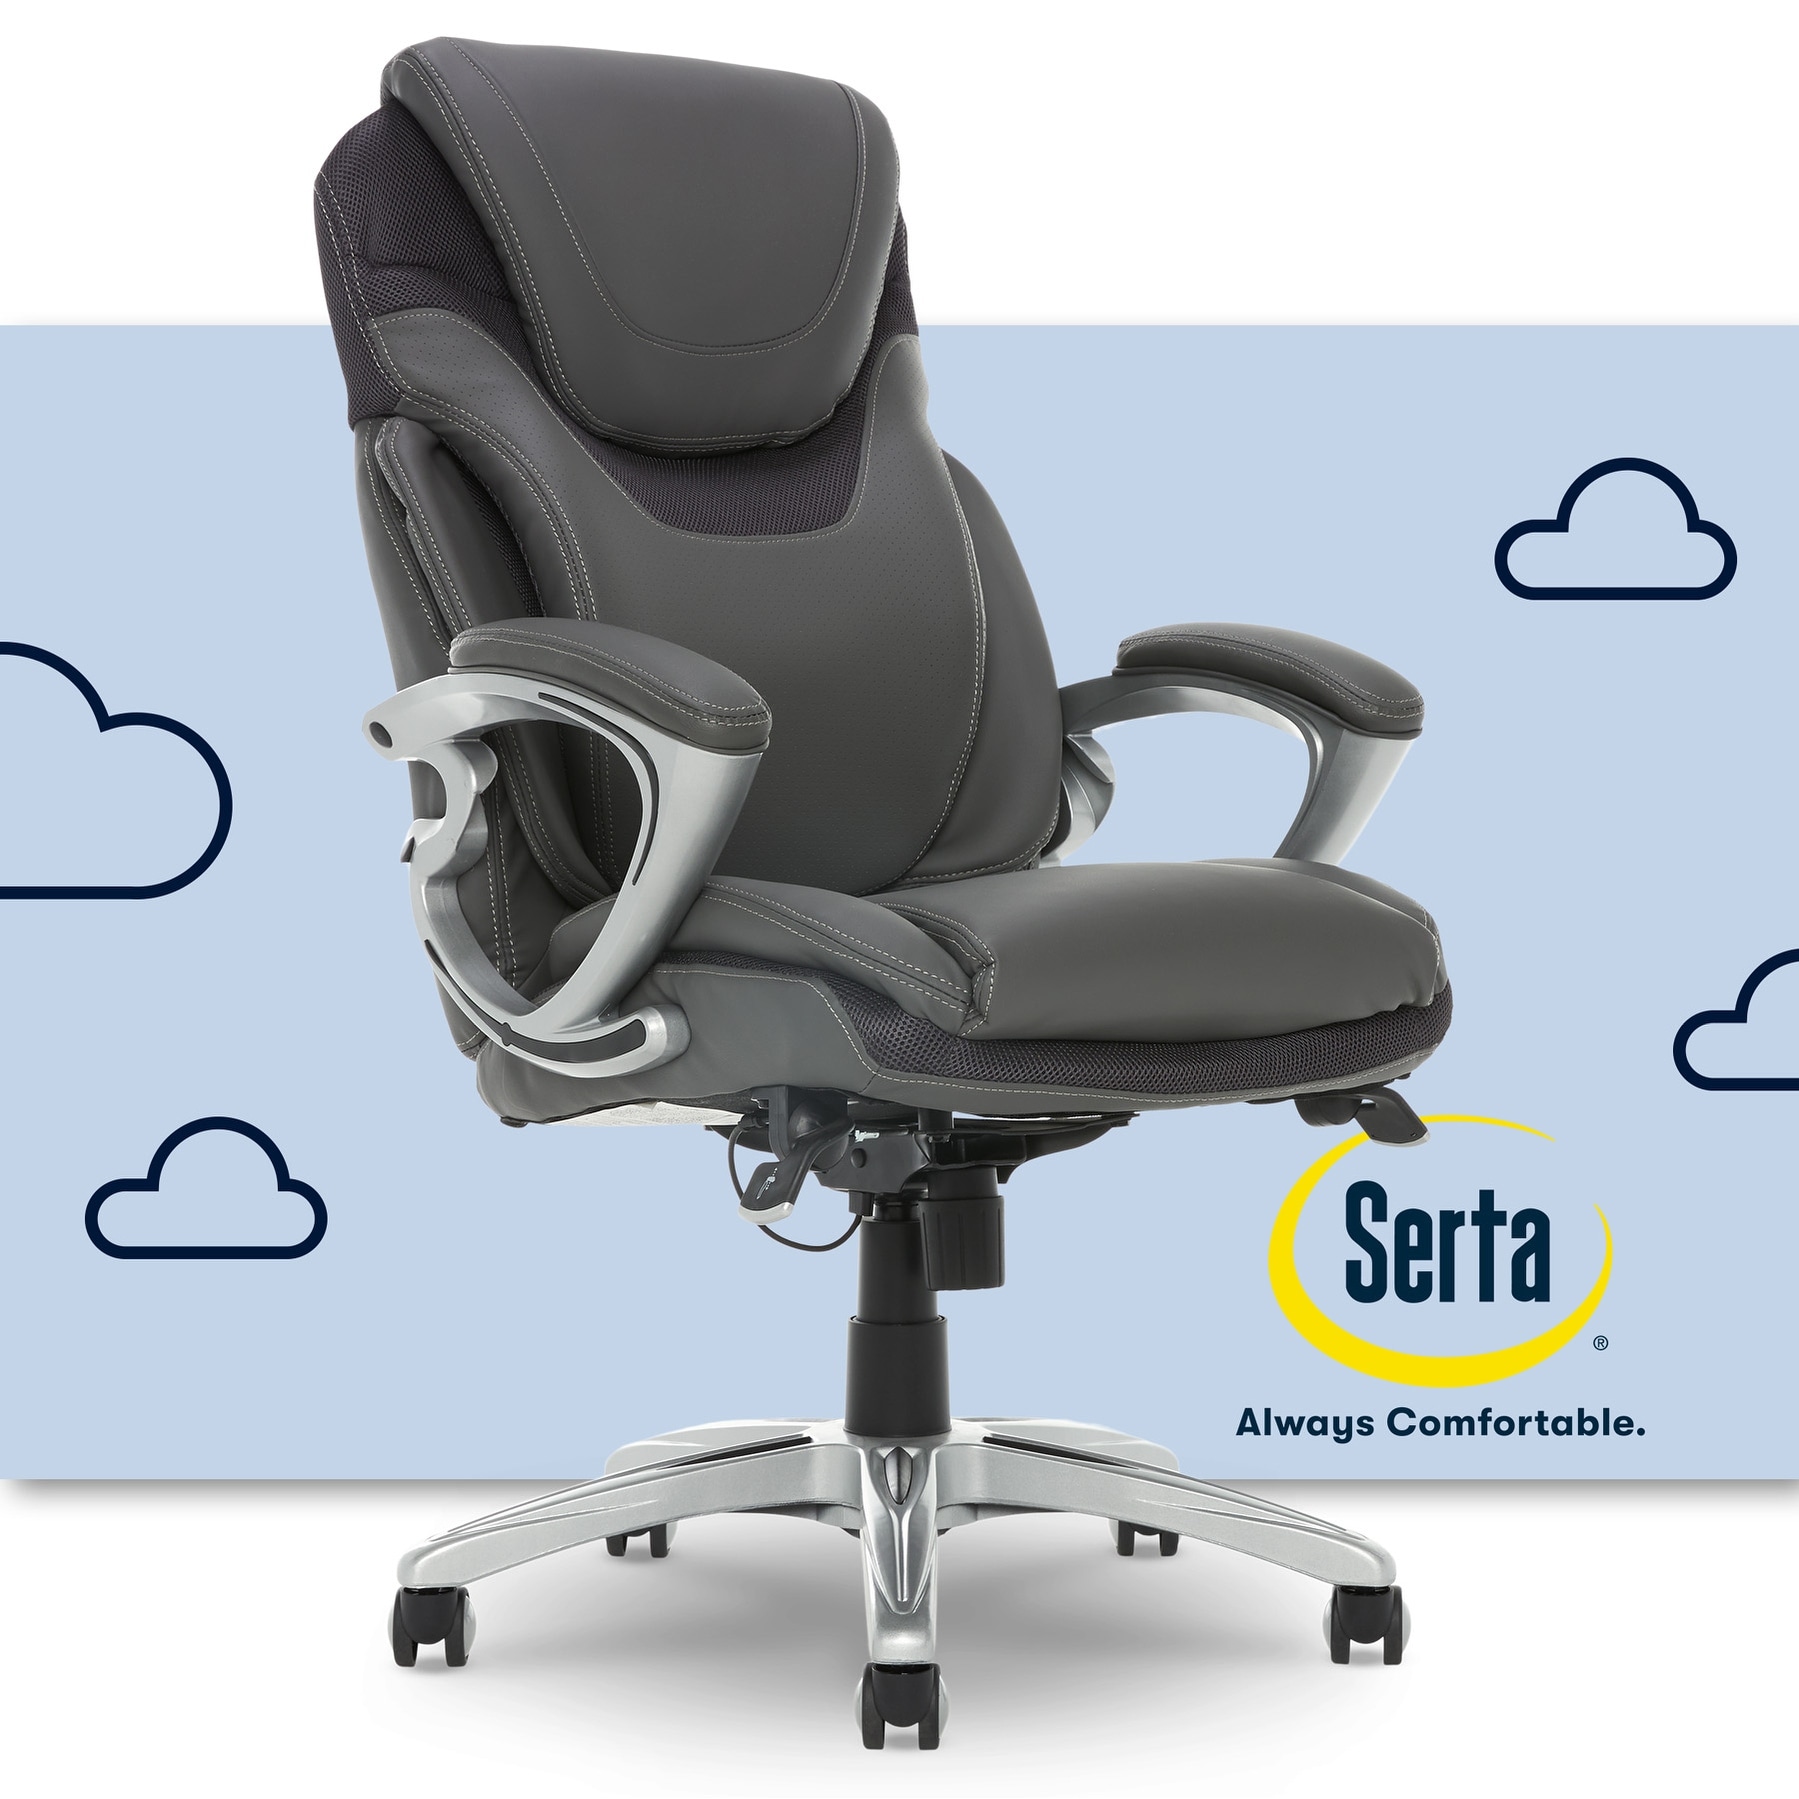 https://ak1.ostkcdn.com/images/products/is/images/direct/f59e52a7c4ab9a9642d48e6a881cd3f439521d02/Serta-Bryce-Executive-Office-Chair-with-AIR-Lumbar-Technology-and-Layered-Body-Pillows.jpg